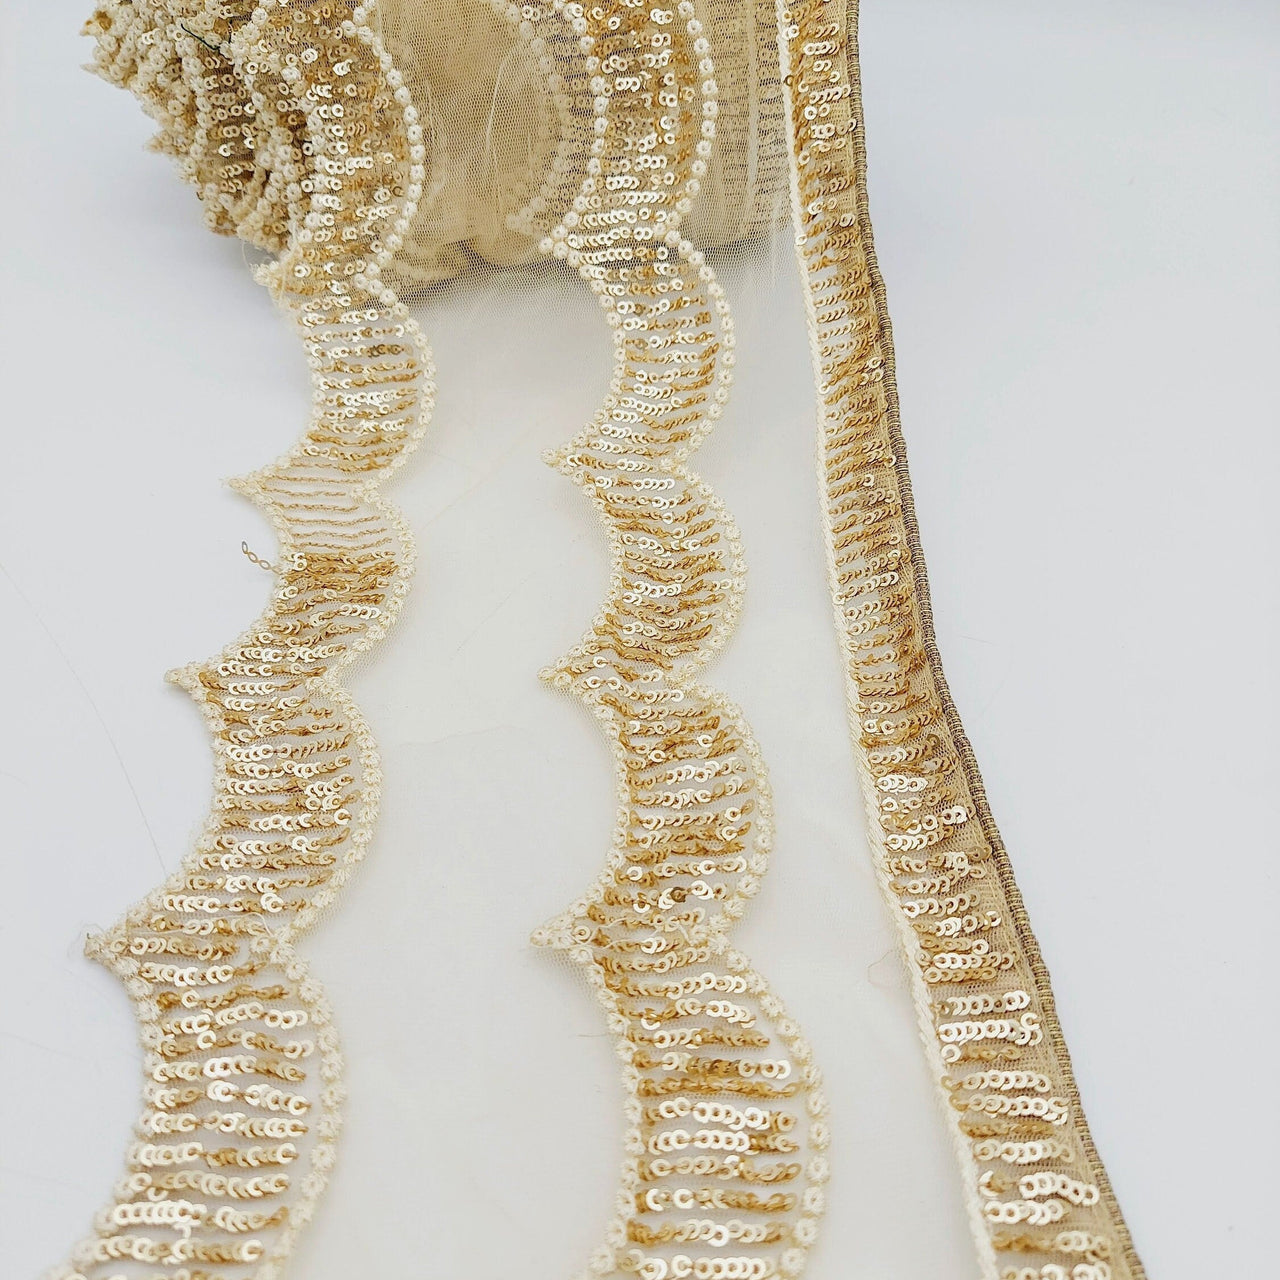 Beige Net Scallop Lace Trim with Gold Sequins, Sari Border, Embroidered Trim